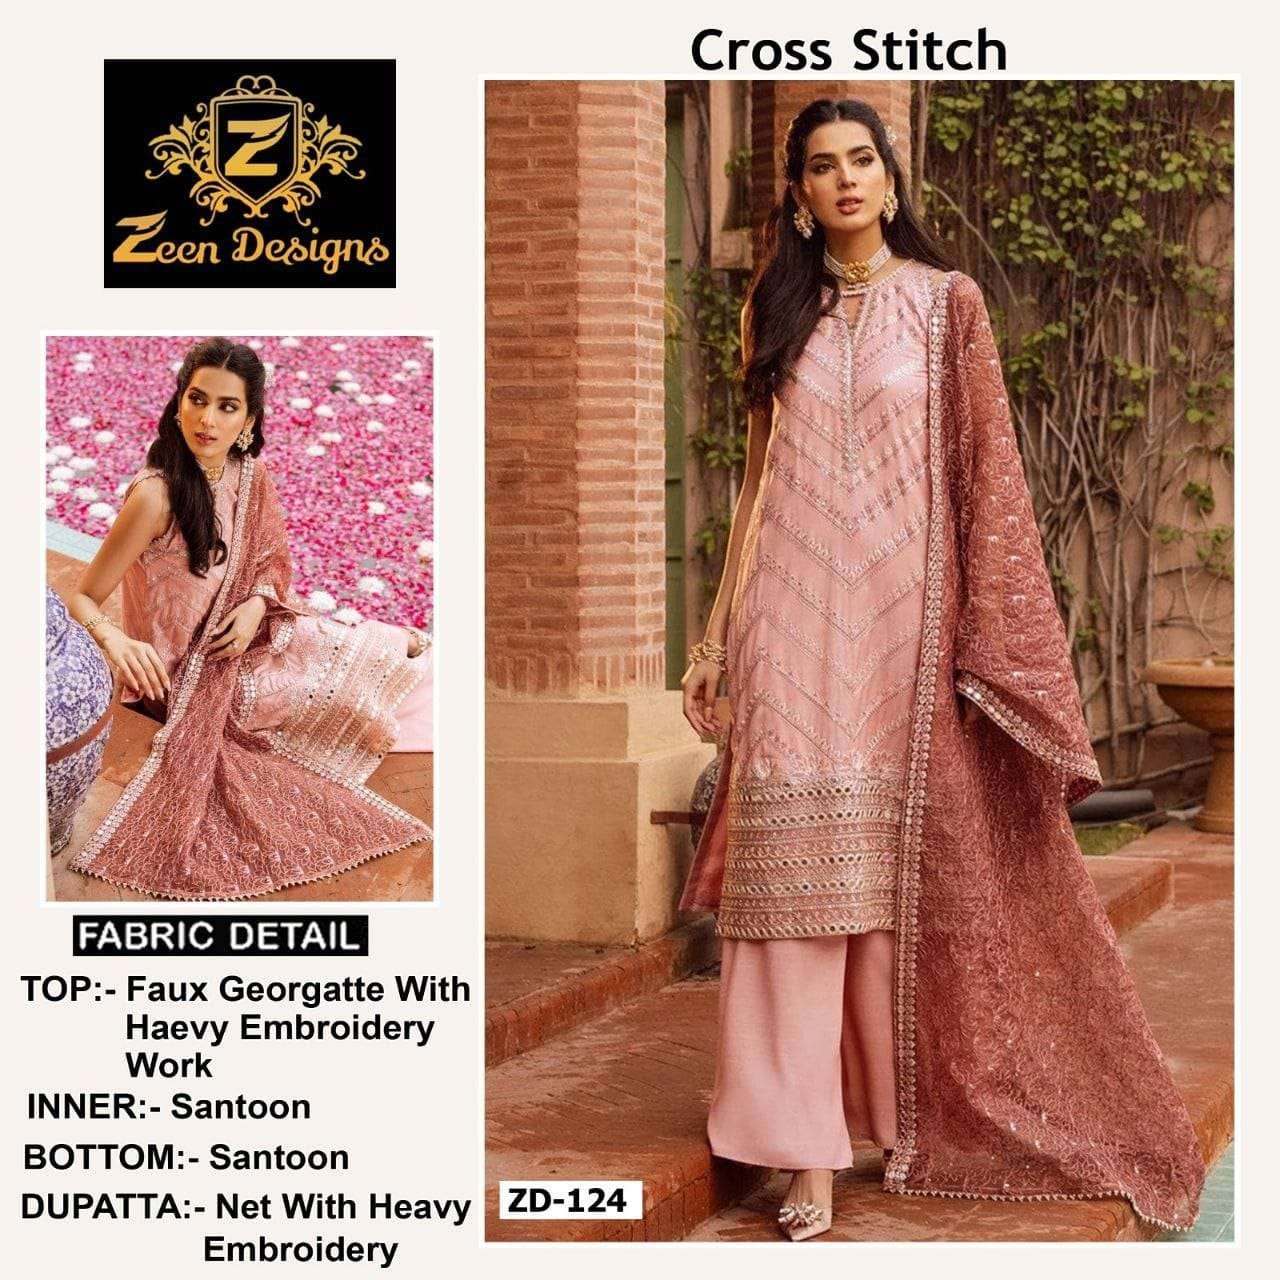 zeen designs presents cross stitch zd 124 faux georgette with heavy embroidery pakistani suit collection heavy embroidery heavy duppta 